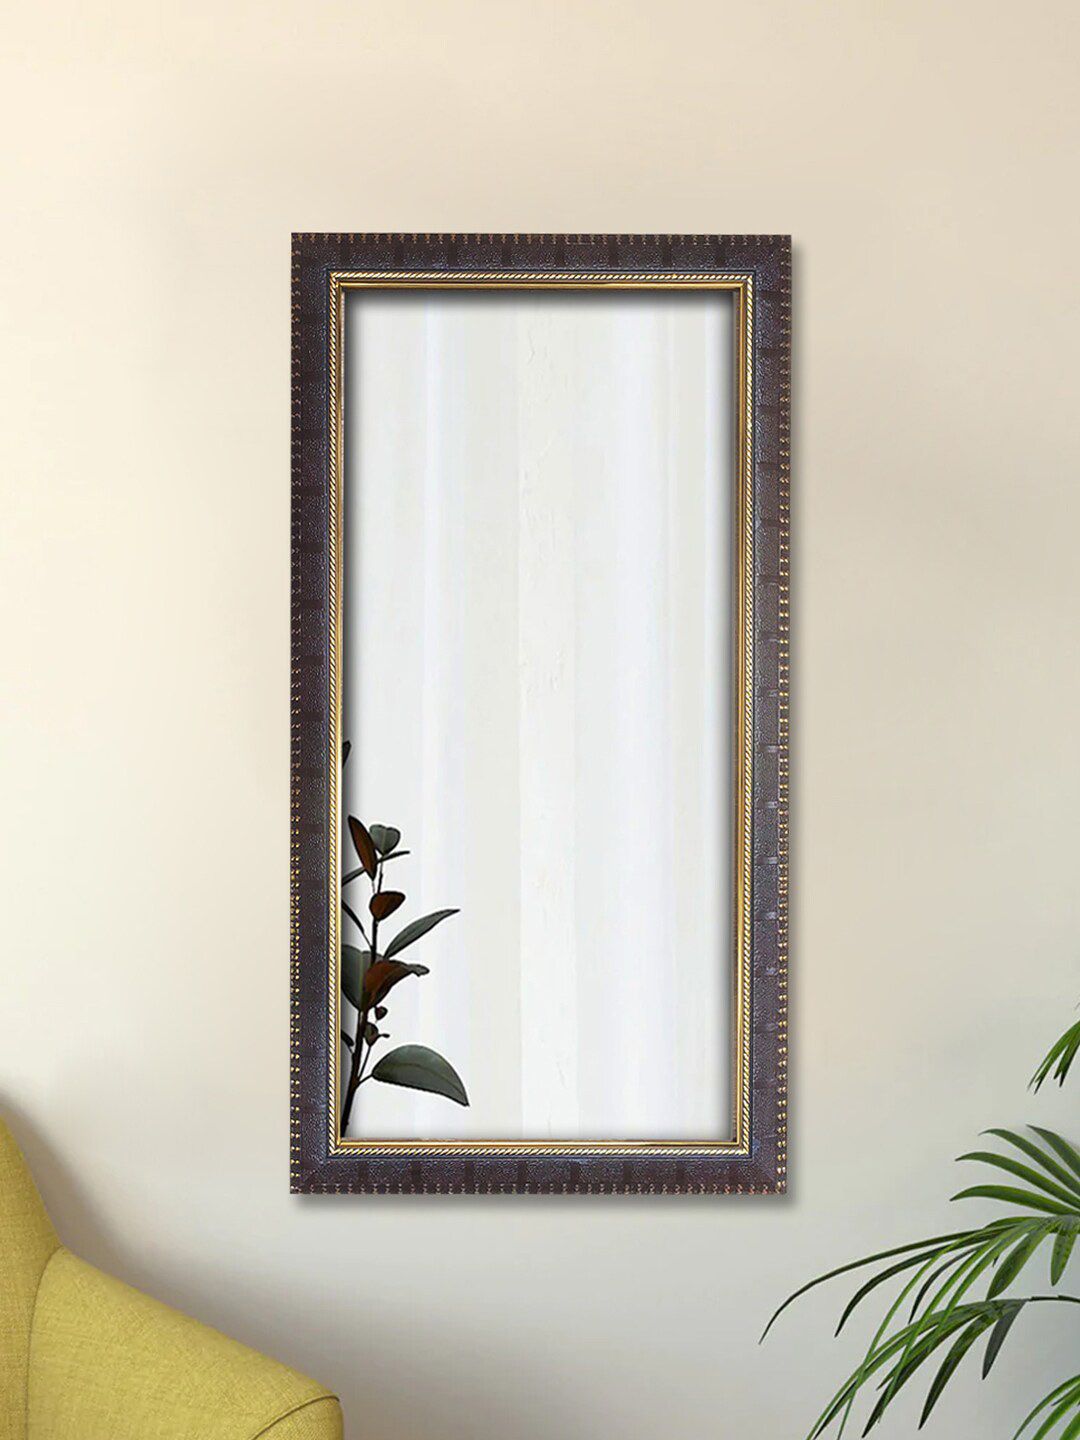 Art Street Brown Textured Wood Decorative Wall Mirrors Price in India